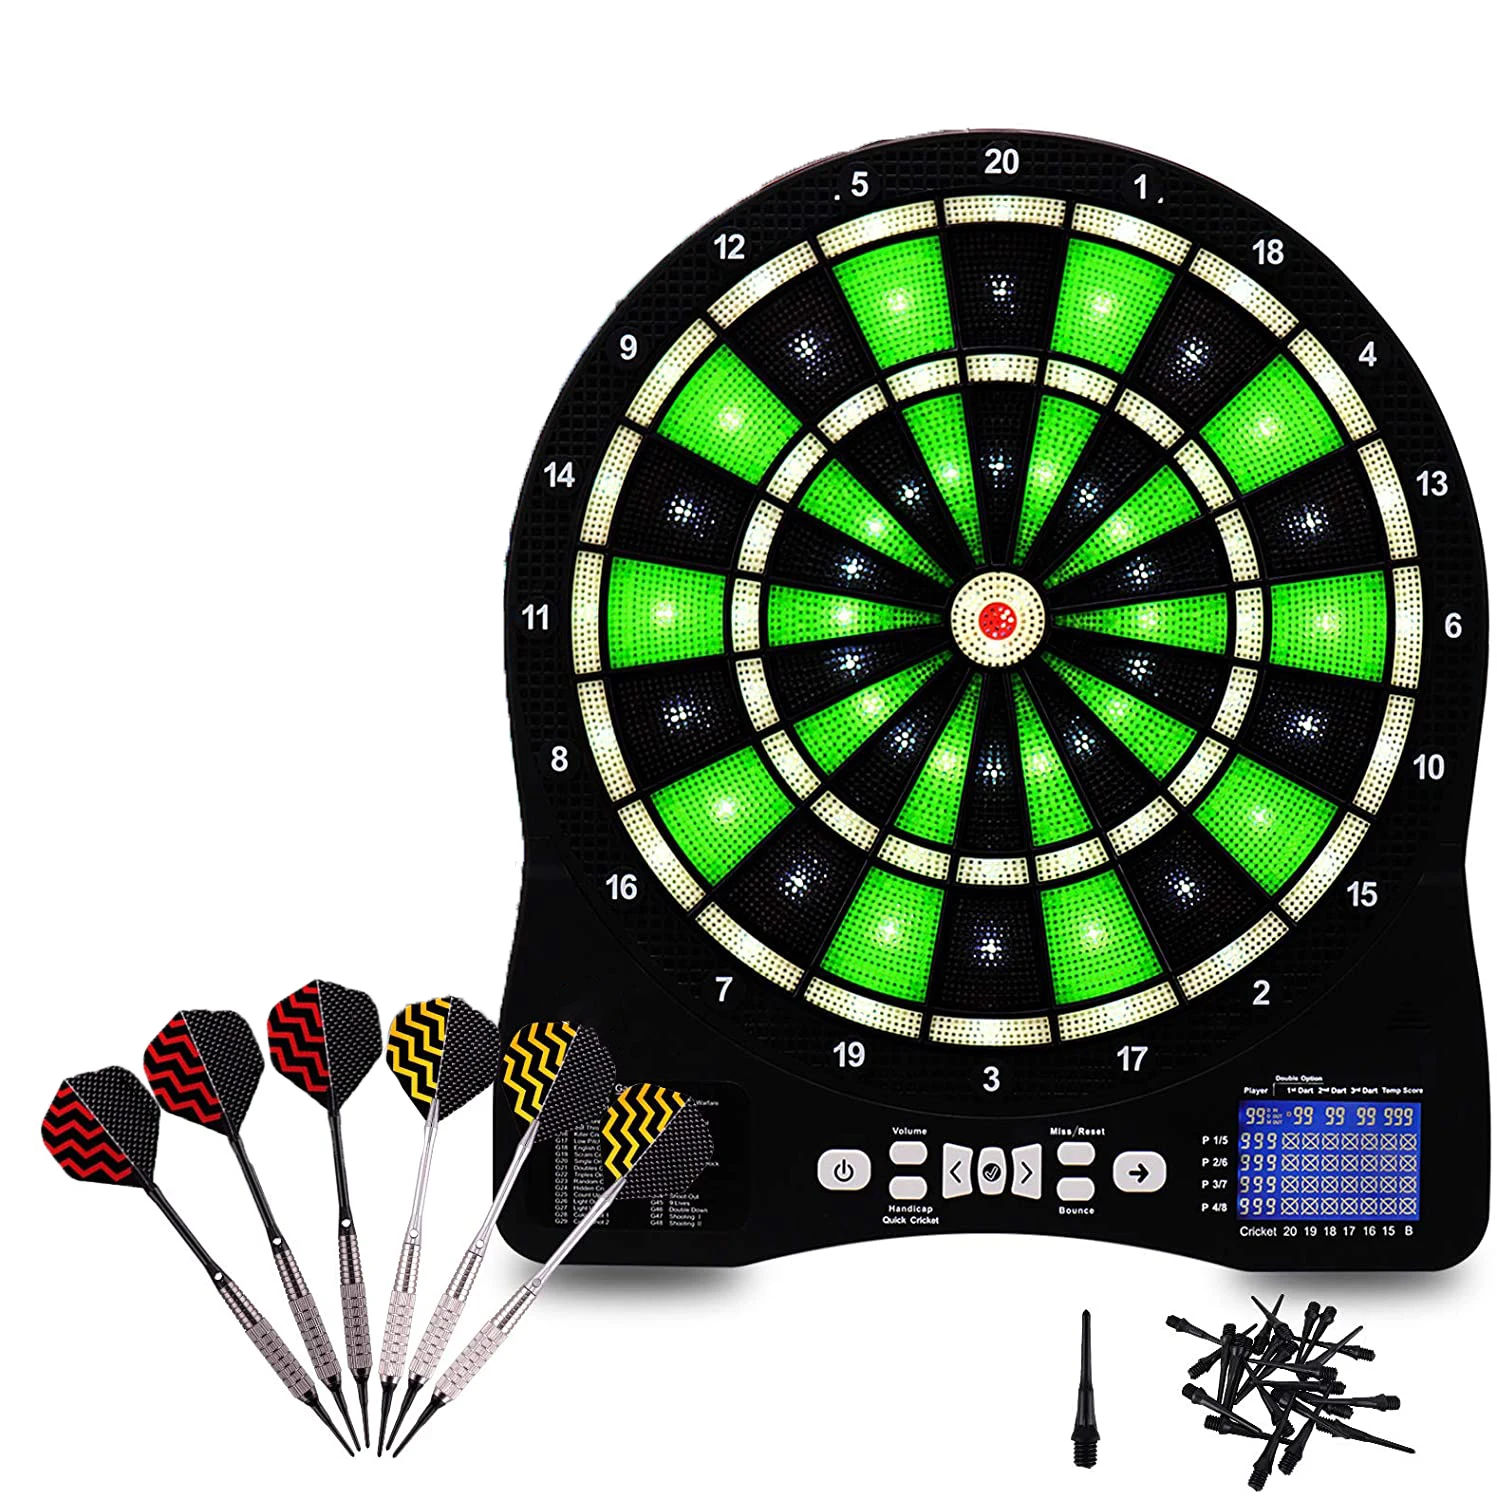 Win.max Best Home Electronic Dart Board With 6 Darts - Buy Dartboards, Electronic Dart Score Board,Digital Dart Board Product on Alibaba.com